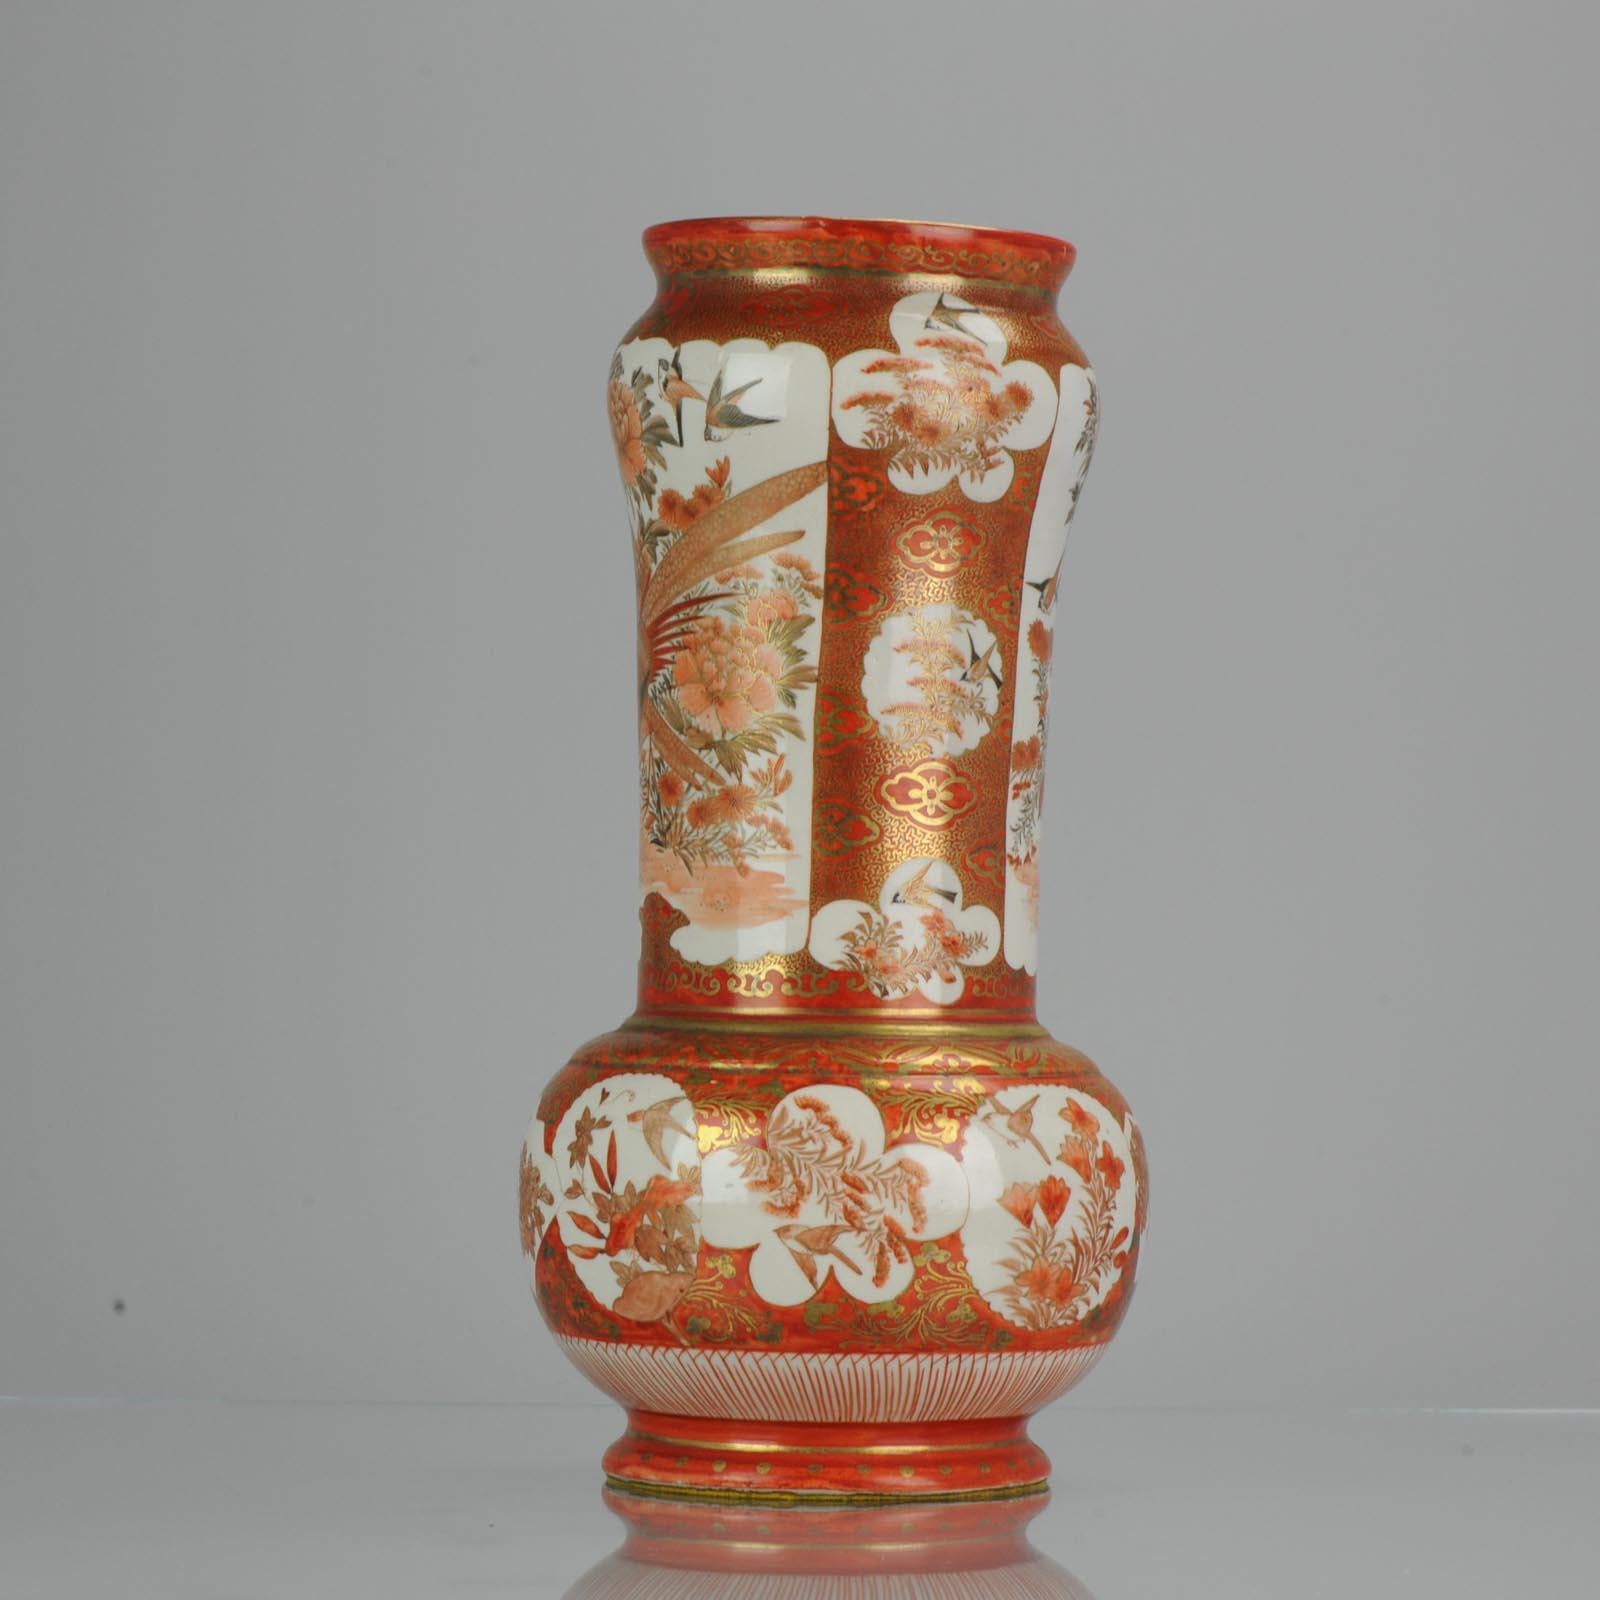 Very lovely piece. With mark at base.
Condition:
Overall condition crackle lines on body. Size: 335mm high, upper rim 115mm
Period:
Meiji Periode, (1867-1912).